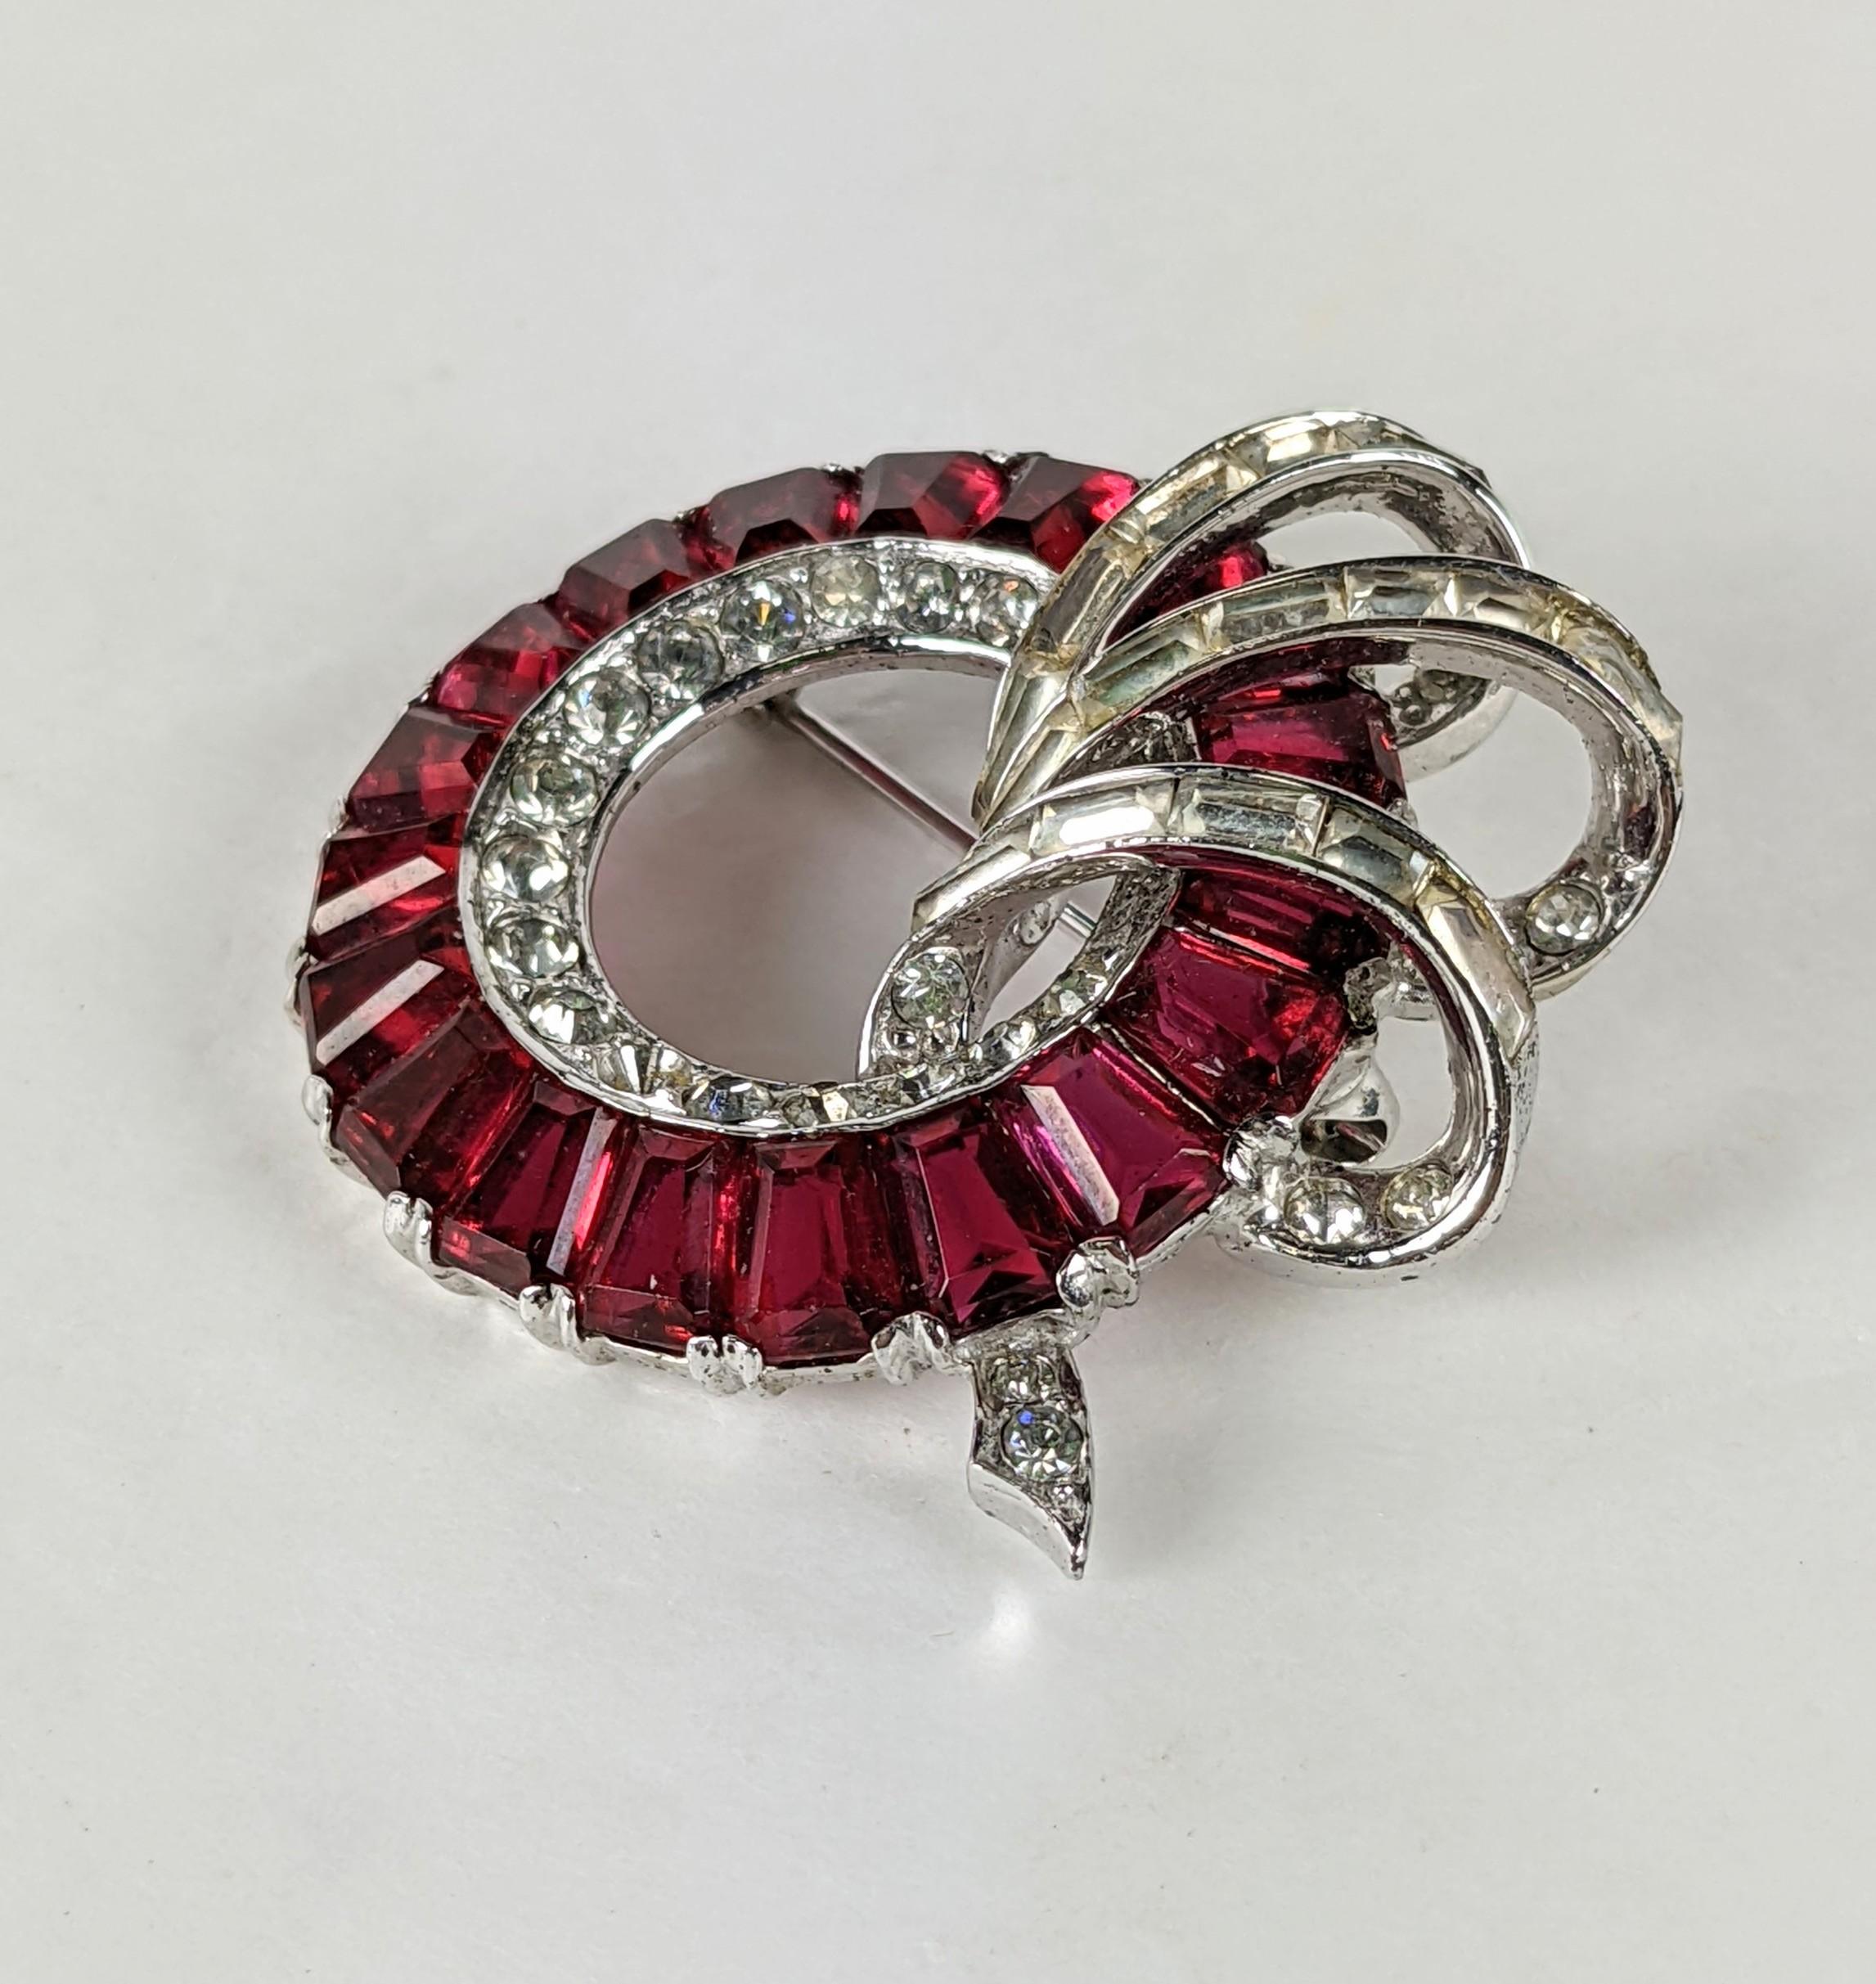 Early Boucher Channel Set Brooch in sterling with rhodium plate finish. Faux rubies are channel set in a wreath form with sprays of pave baguettes. Marked 